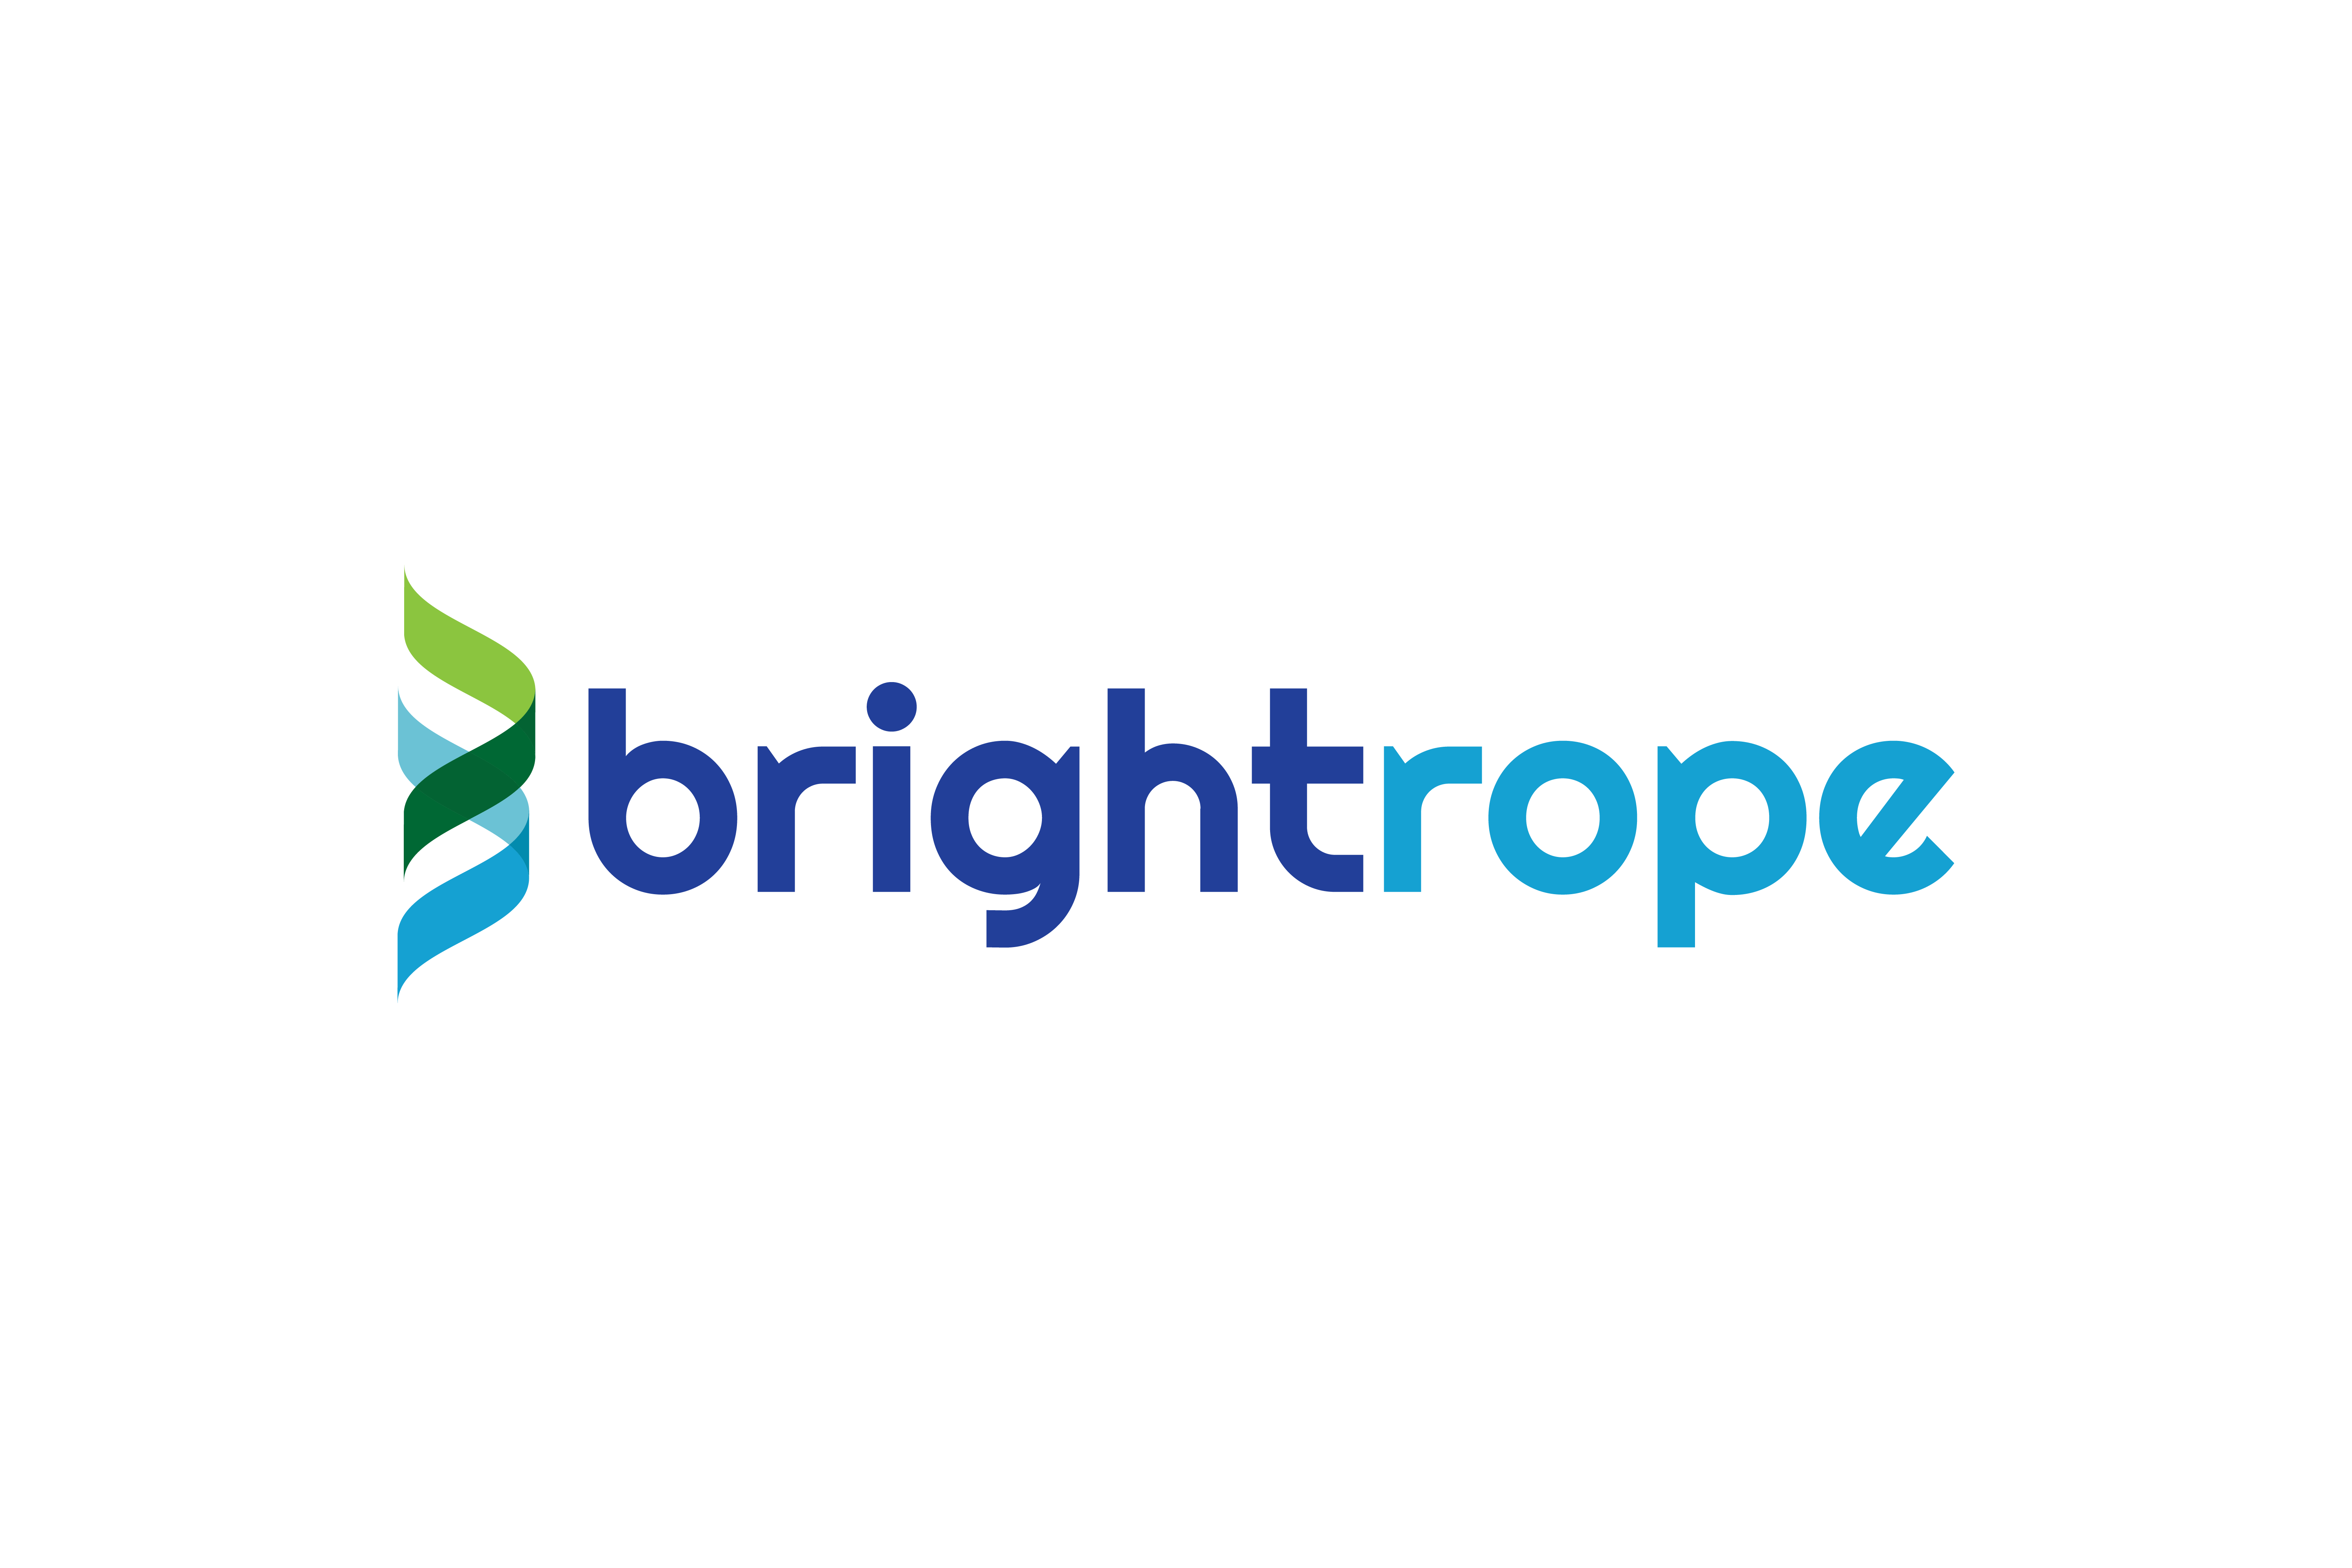 Logo design by Virtual Apiary for Brightrope